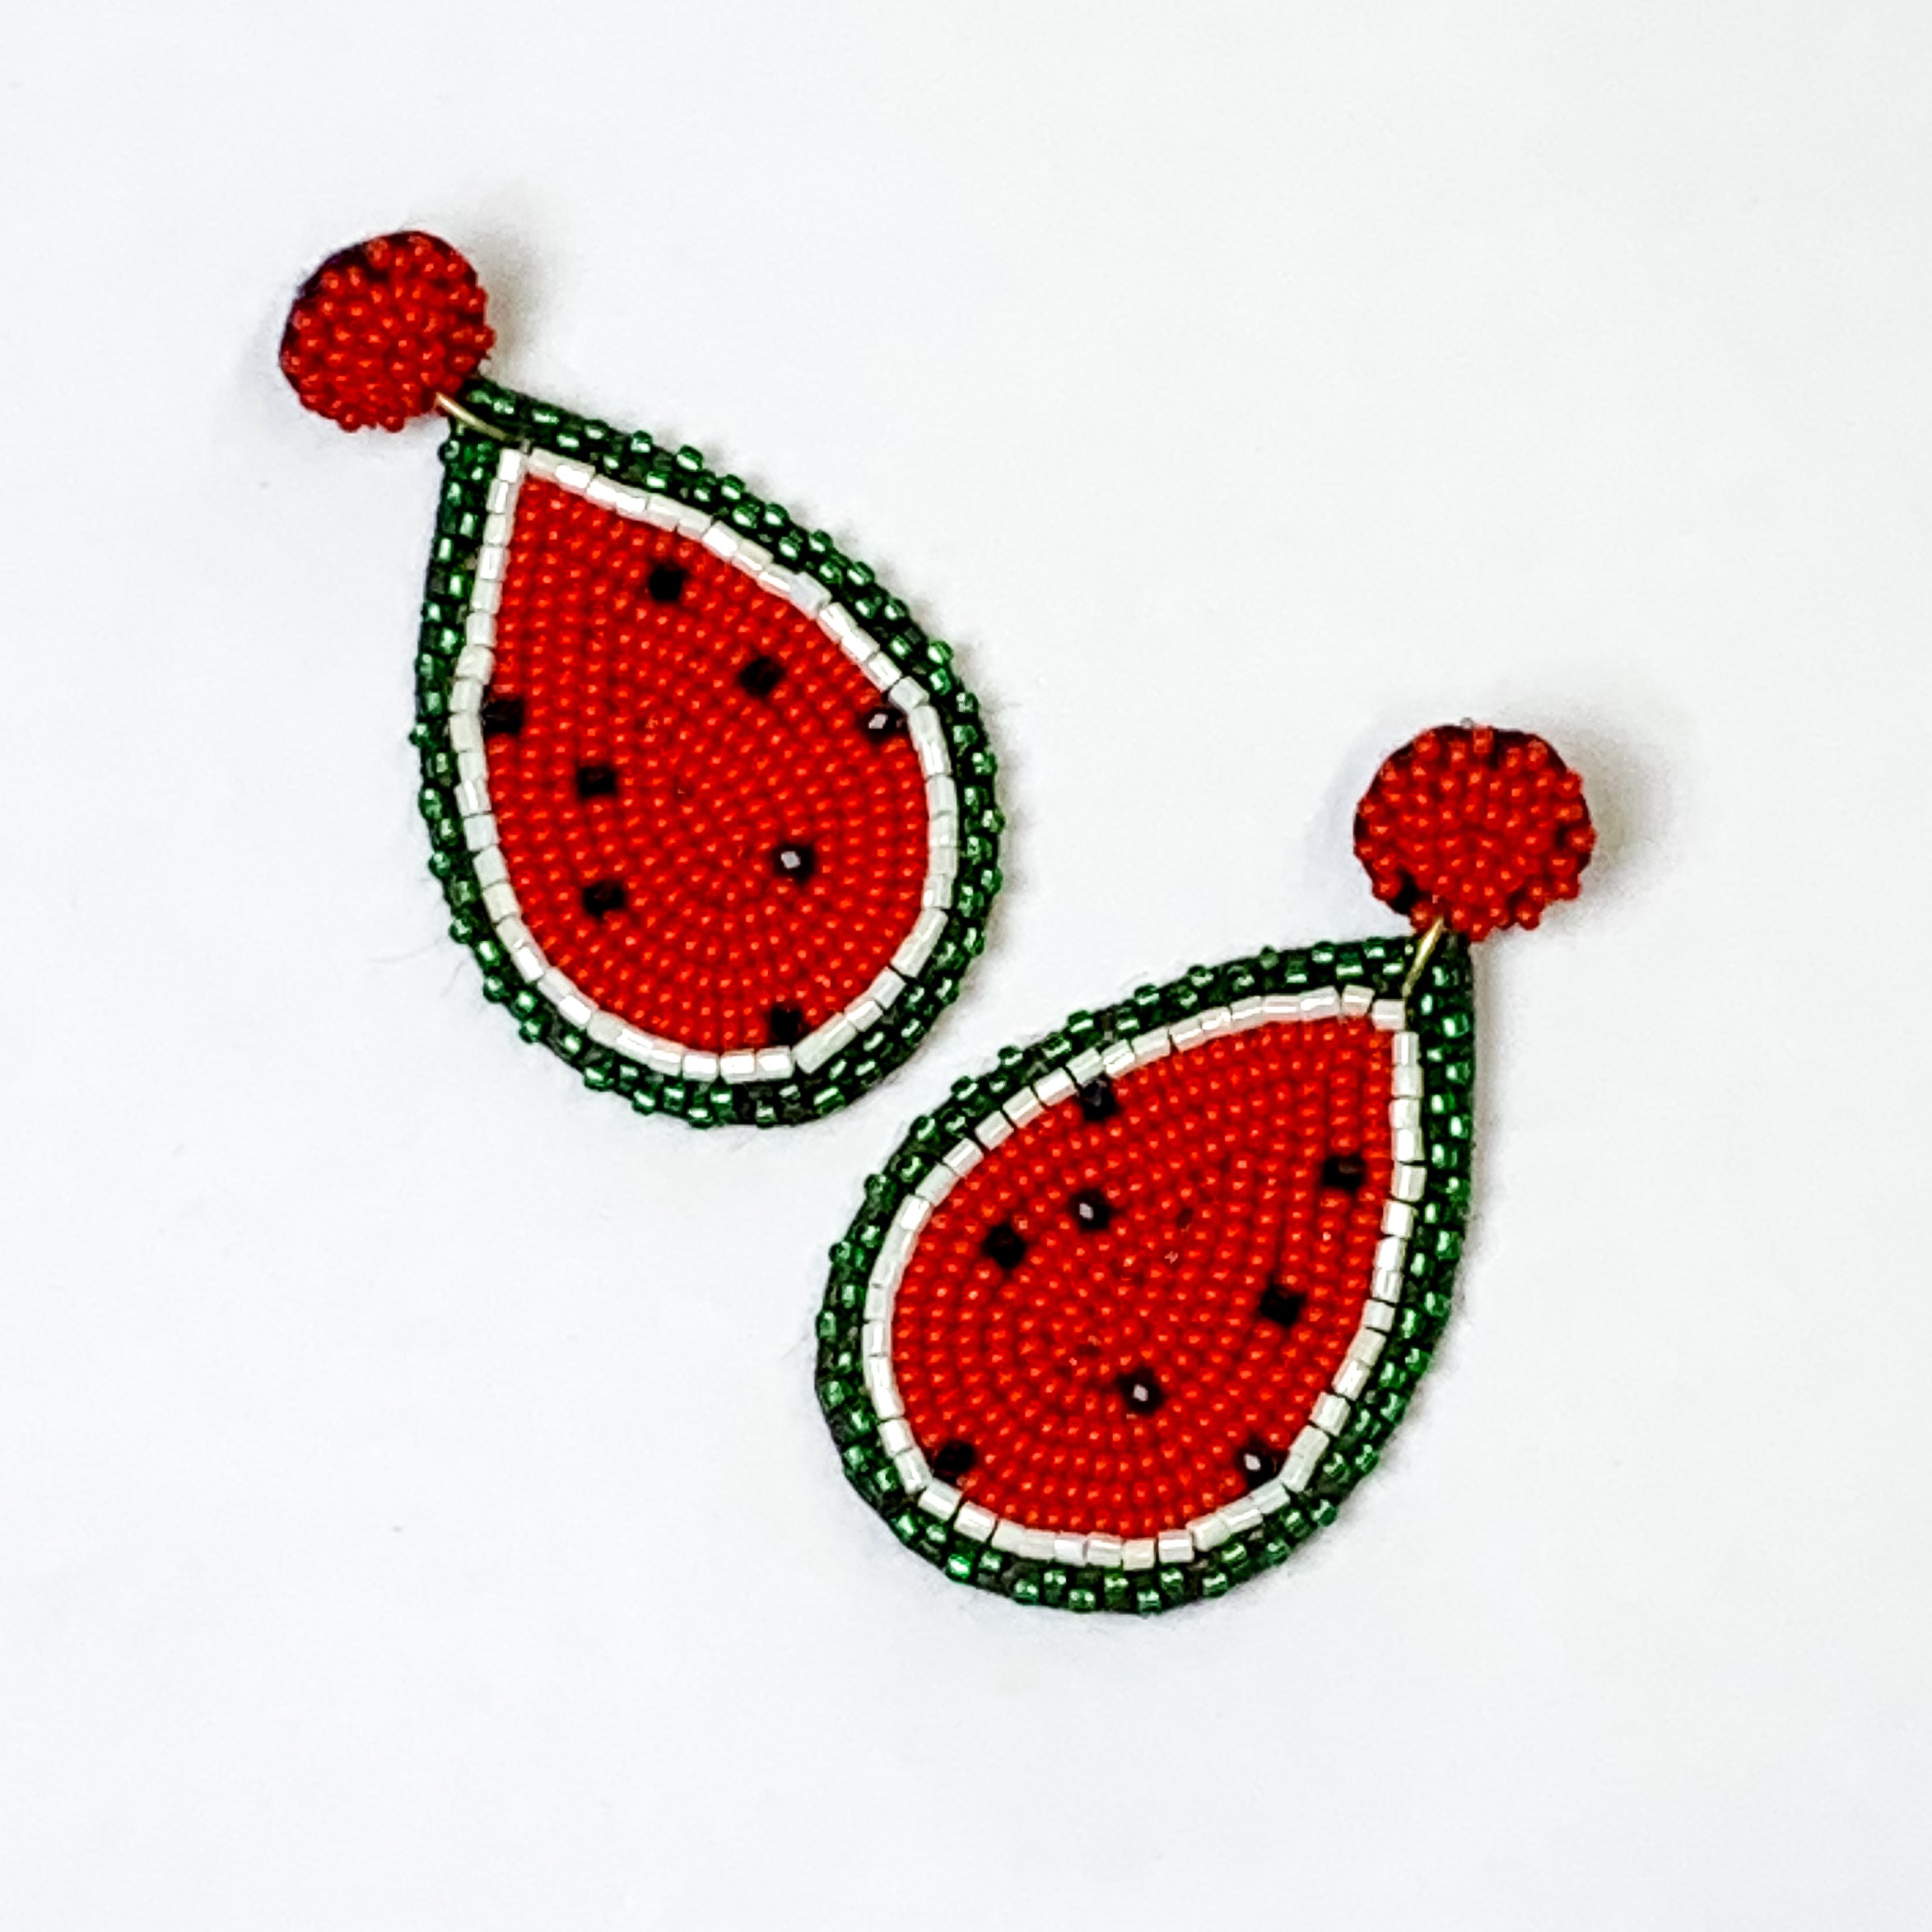 Beaded Watermelon Teardrop Earrings in Red and Green - Giddy Up Glamour Boutique